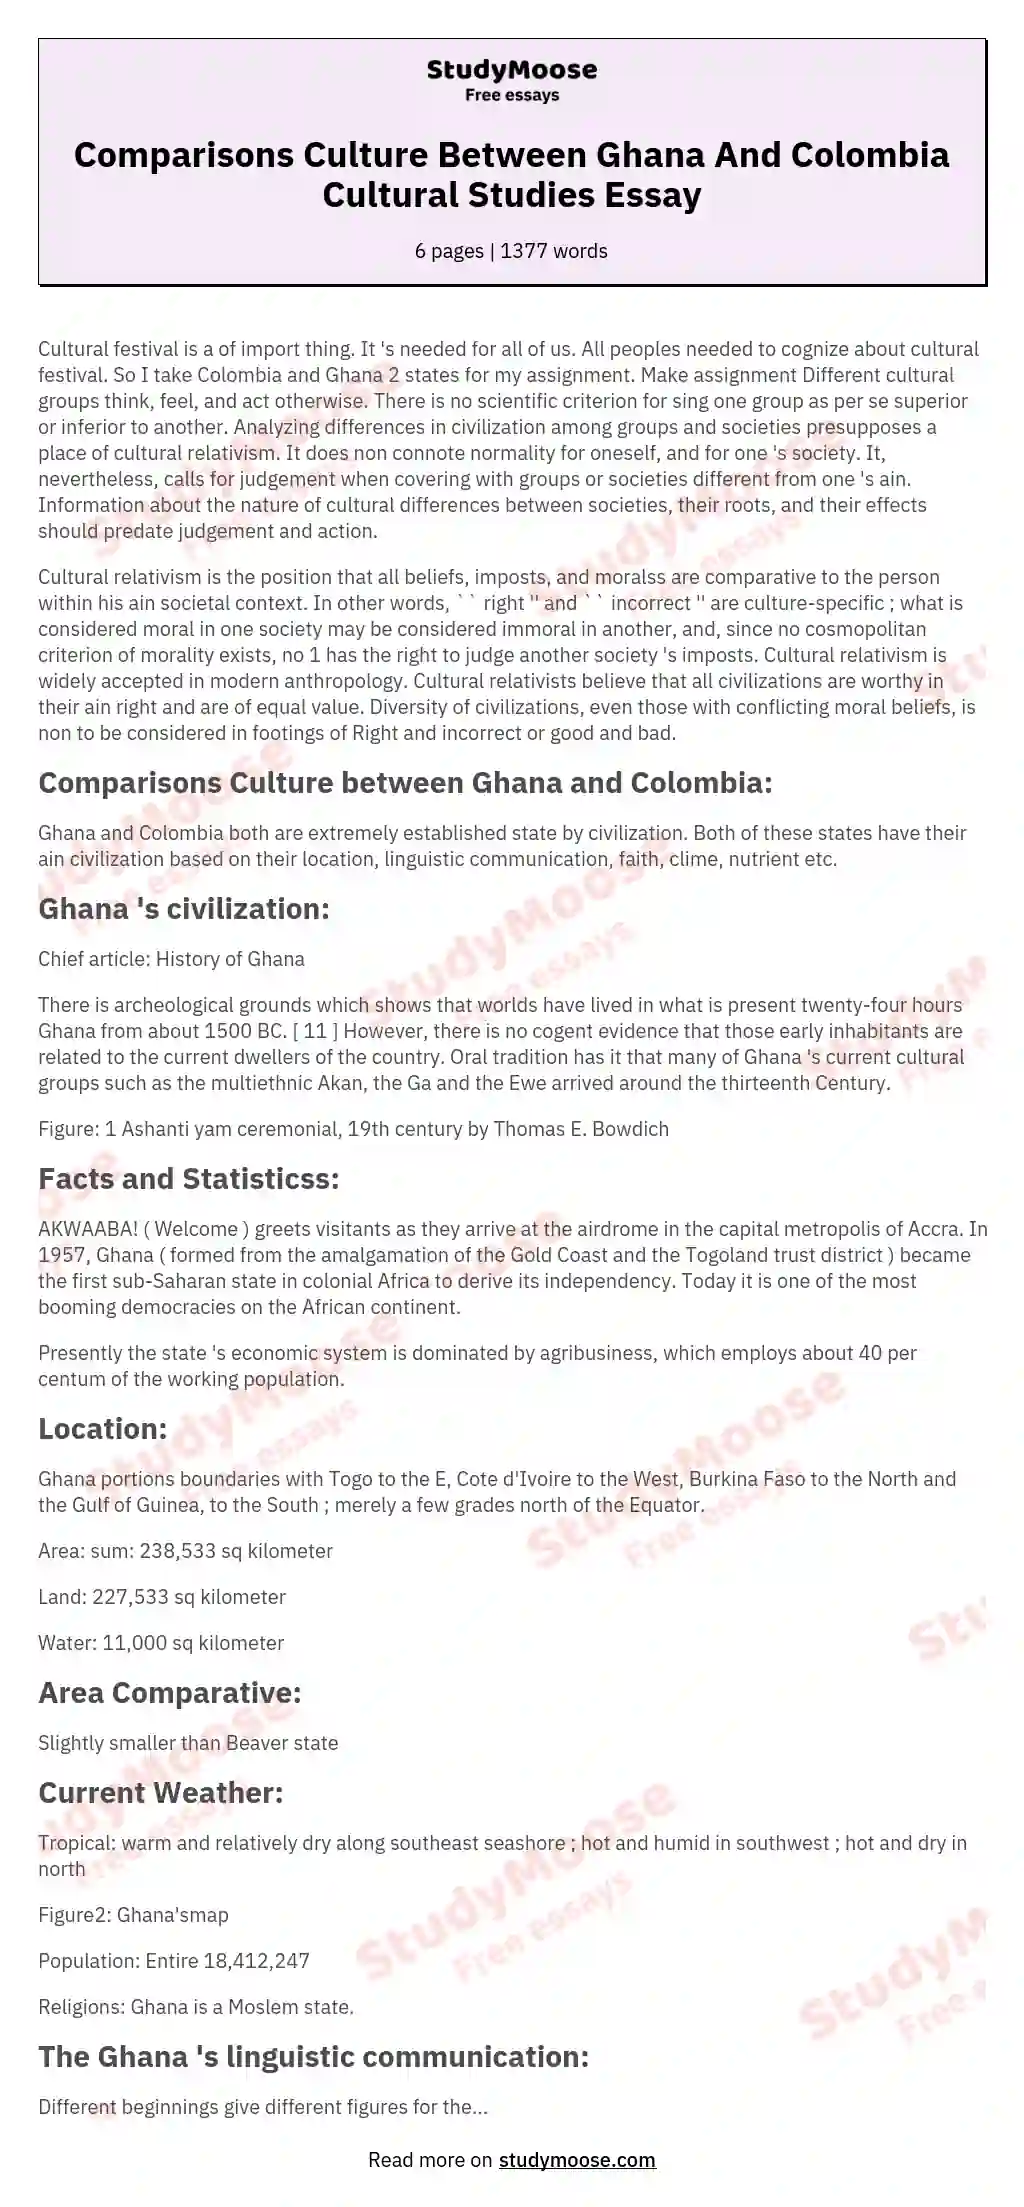 Comparisons Culture Between Ghana And Colombia Cultural Studies Essay